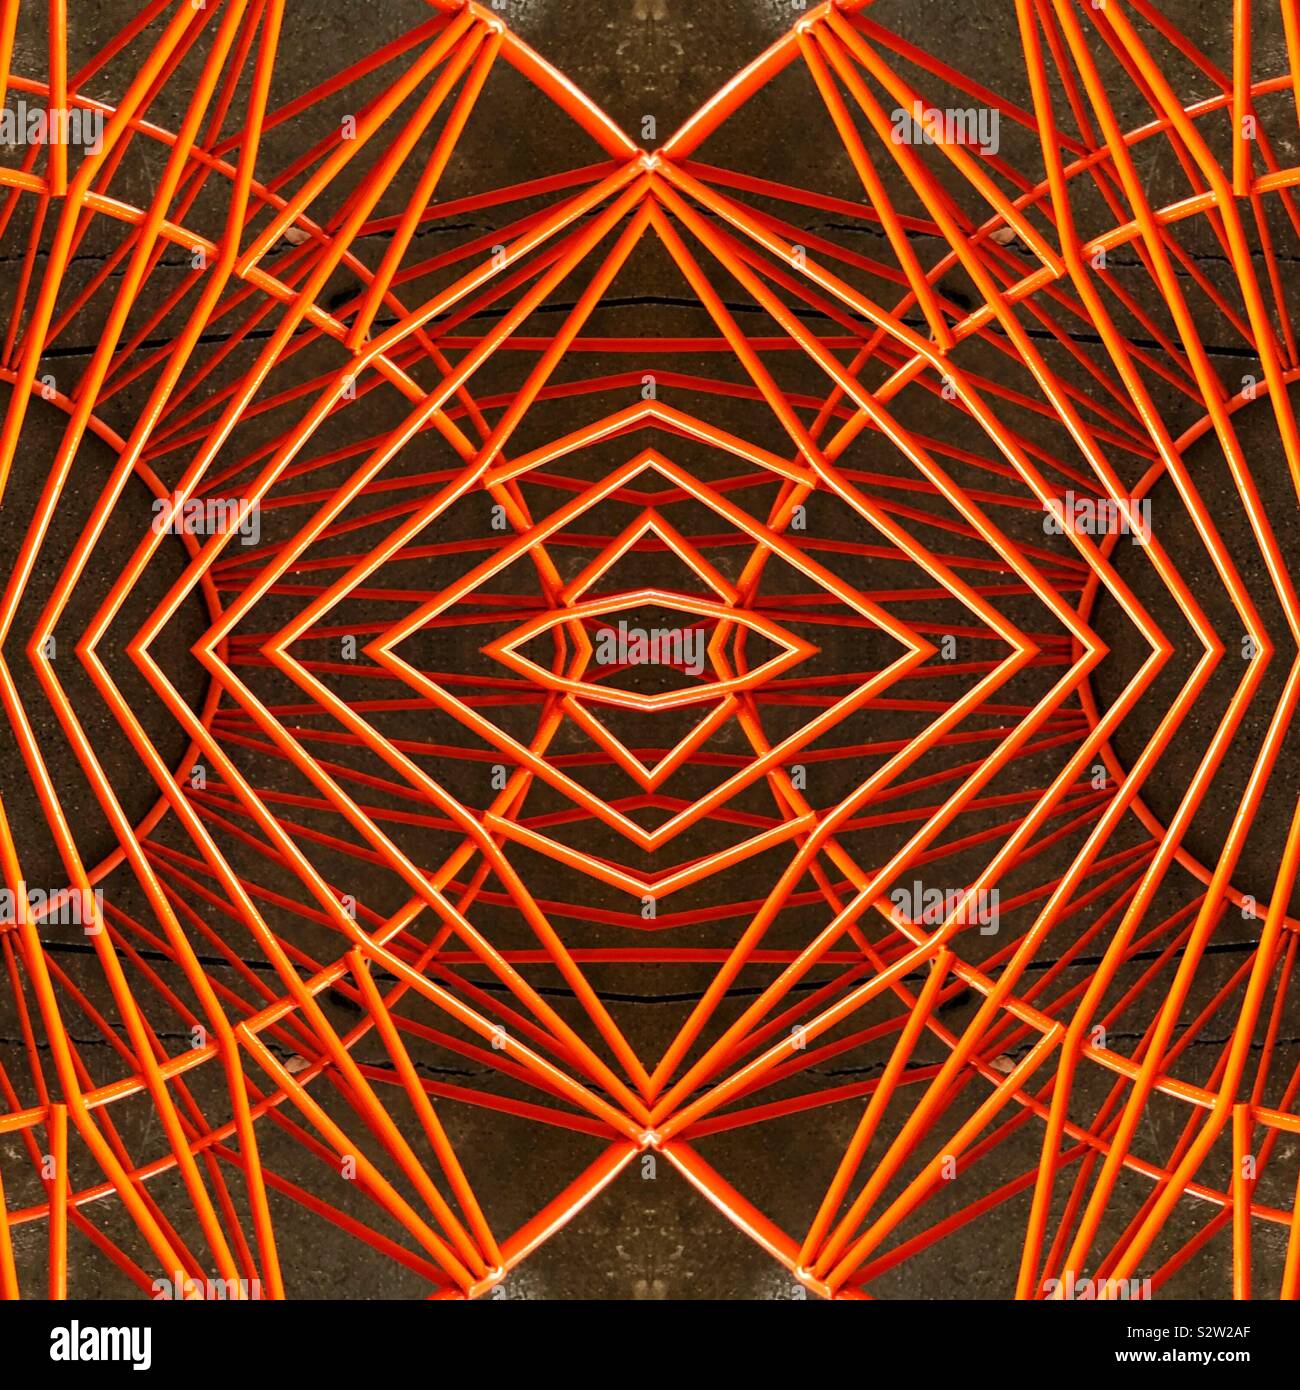 An abstract digital art pattern of orange lines and angles Stock Photo